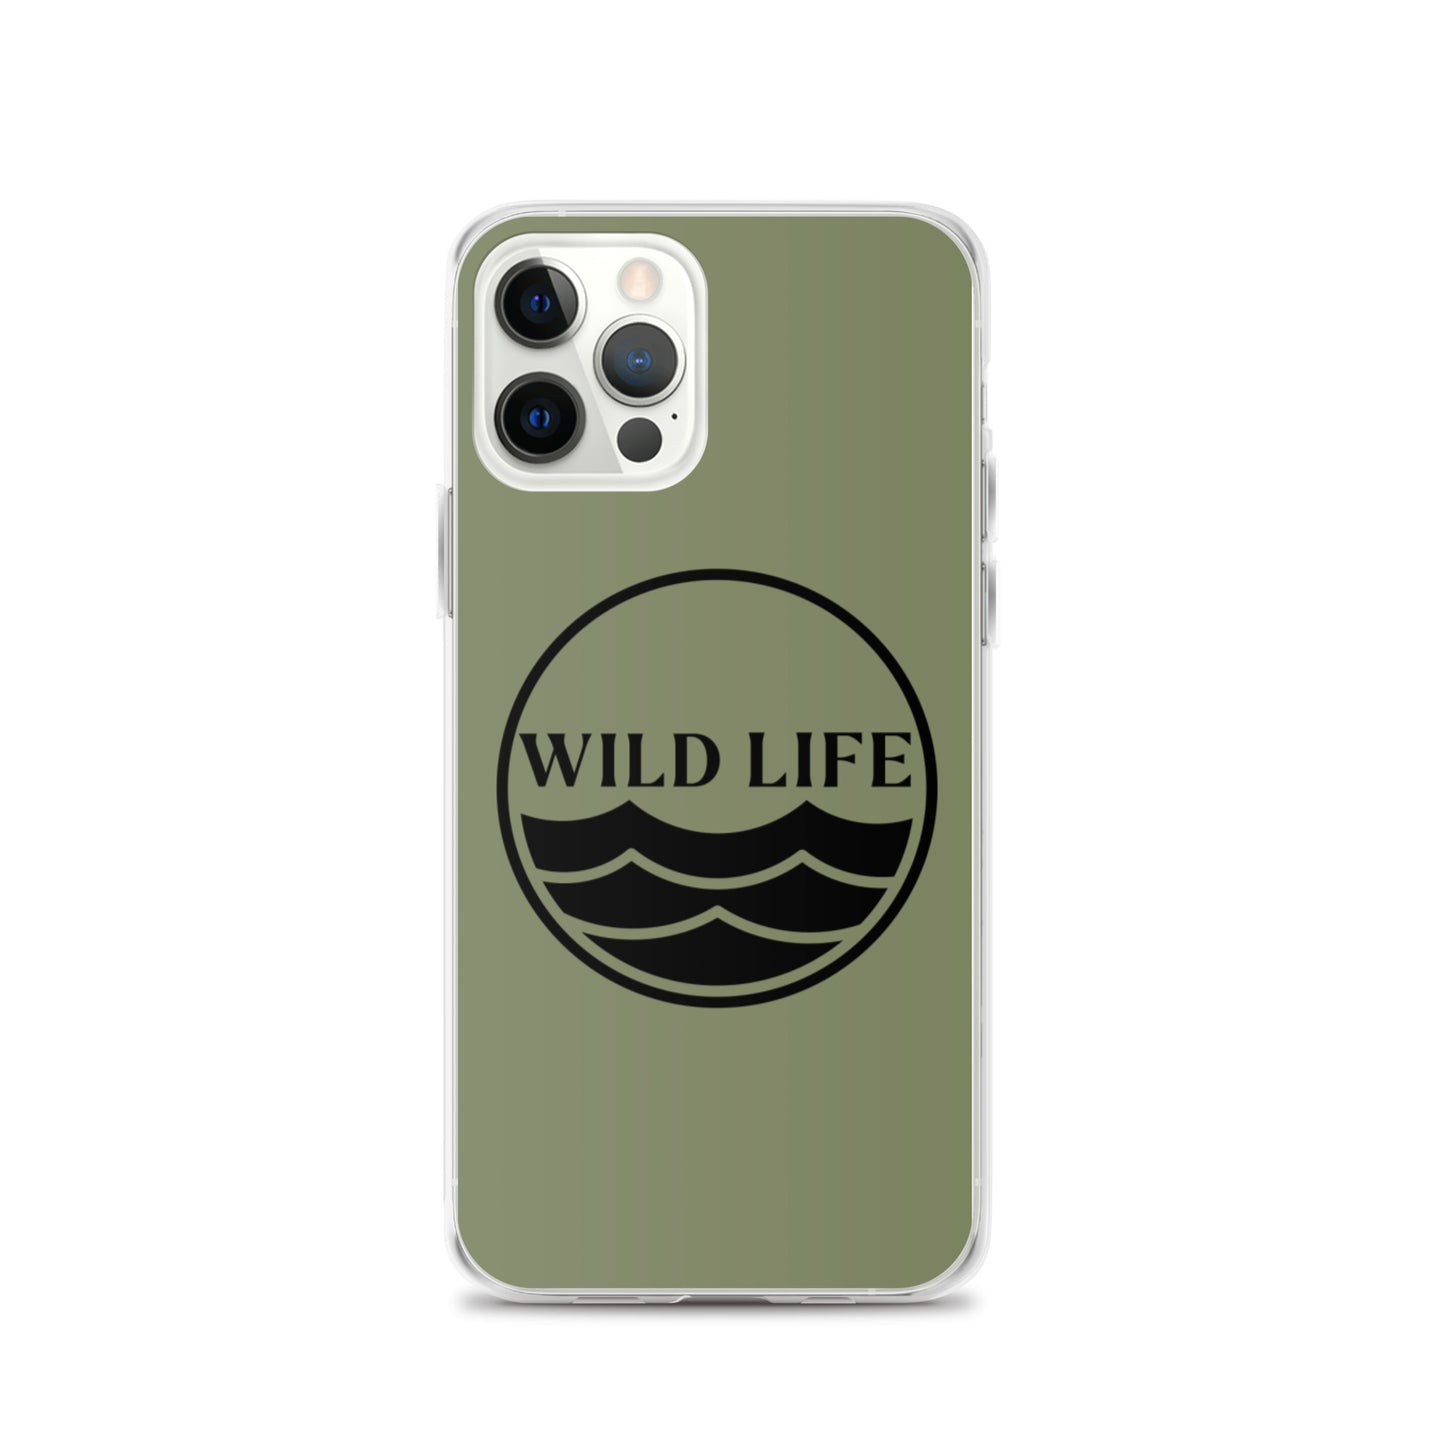 WILD LIFE iPhone Case - Forest